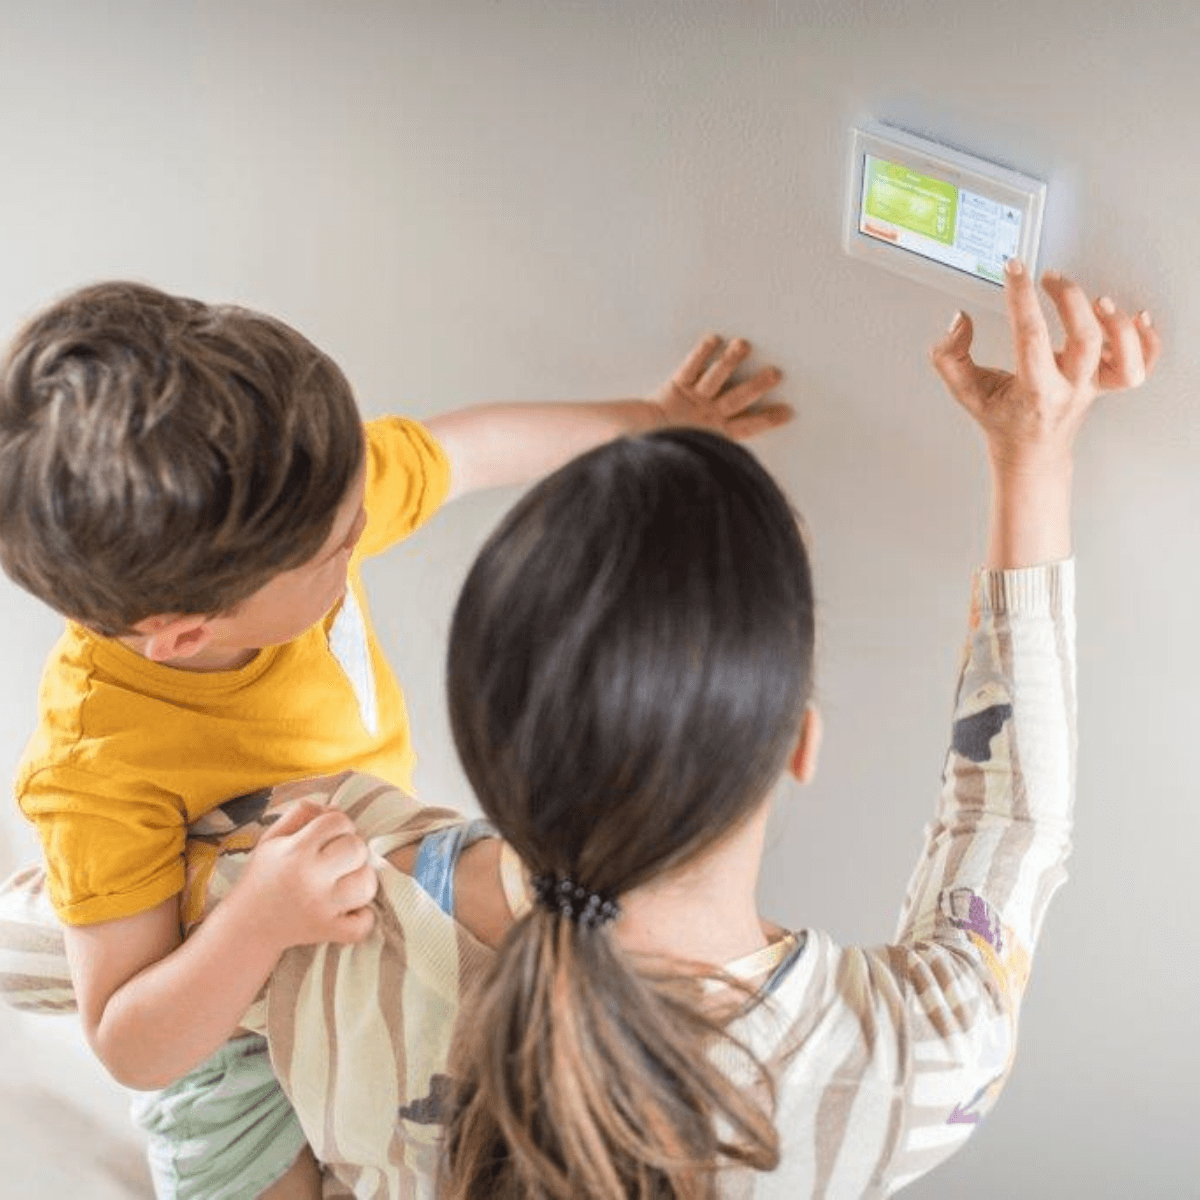 Choose the right thermostat for your home